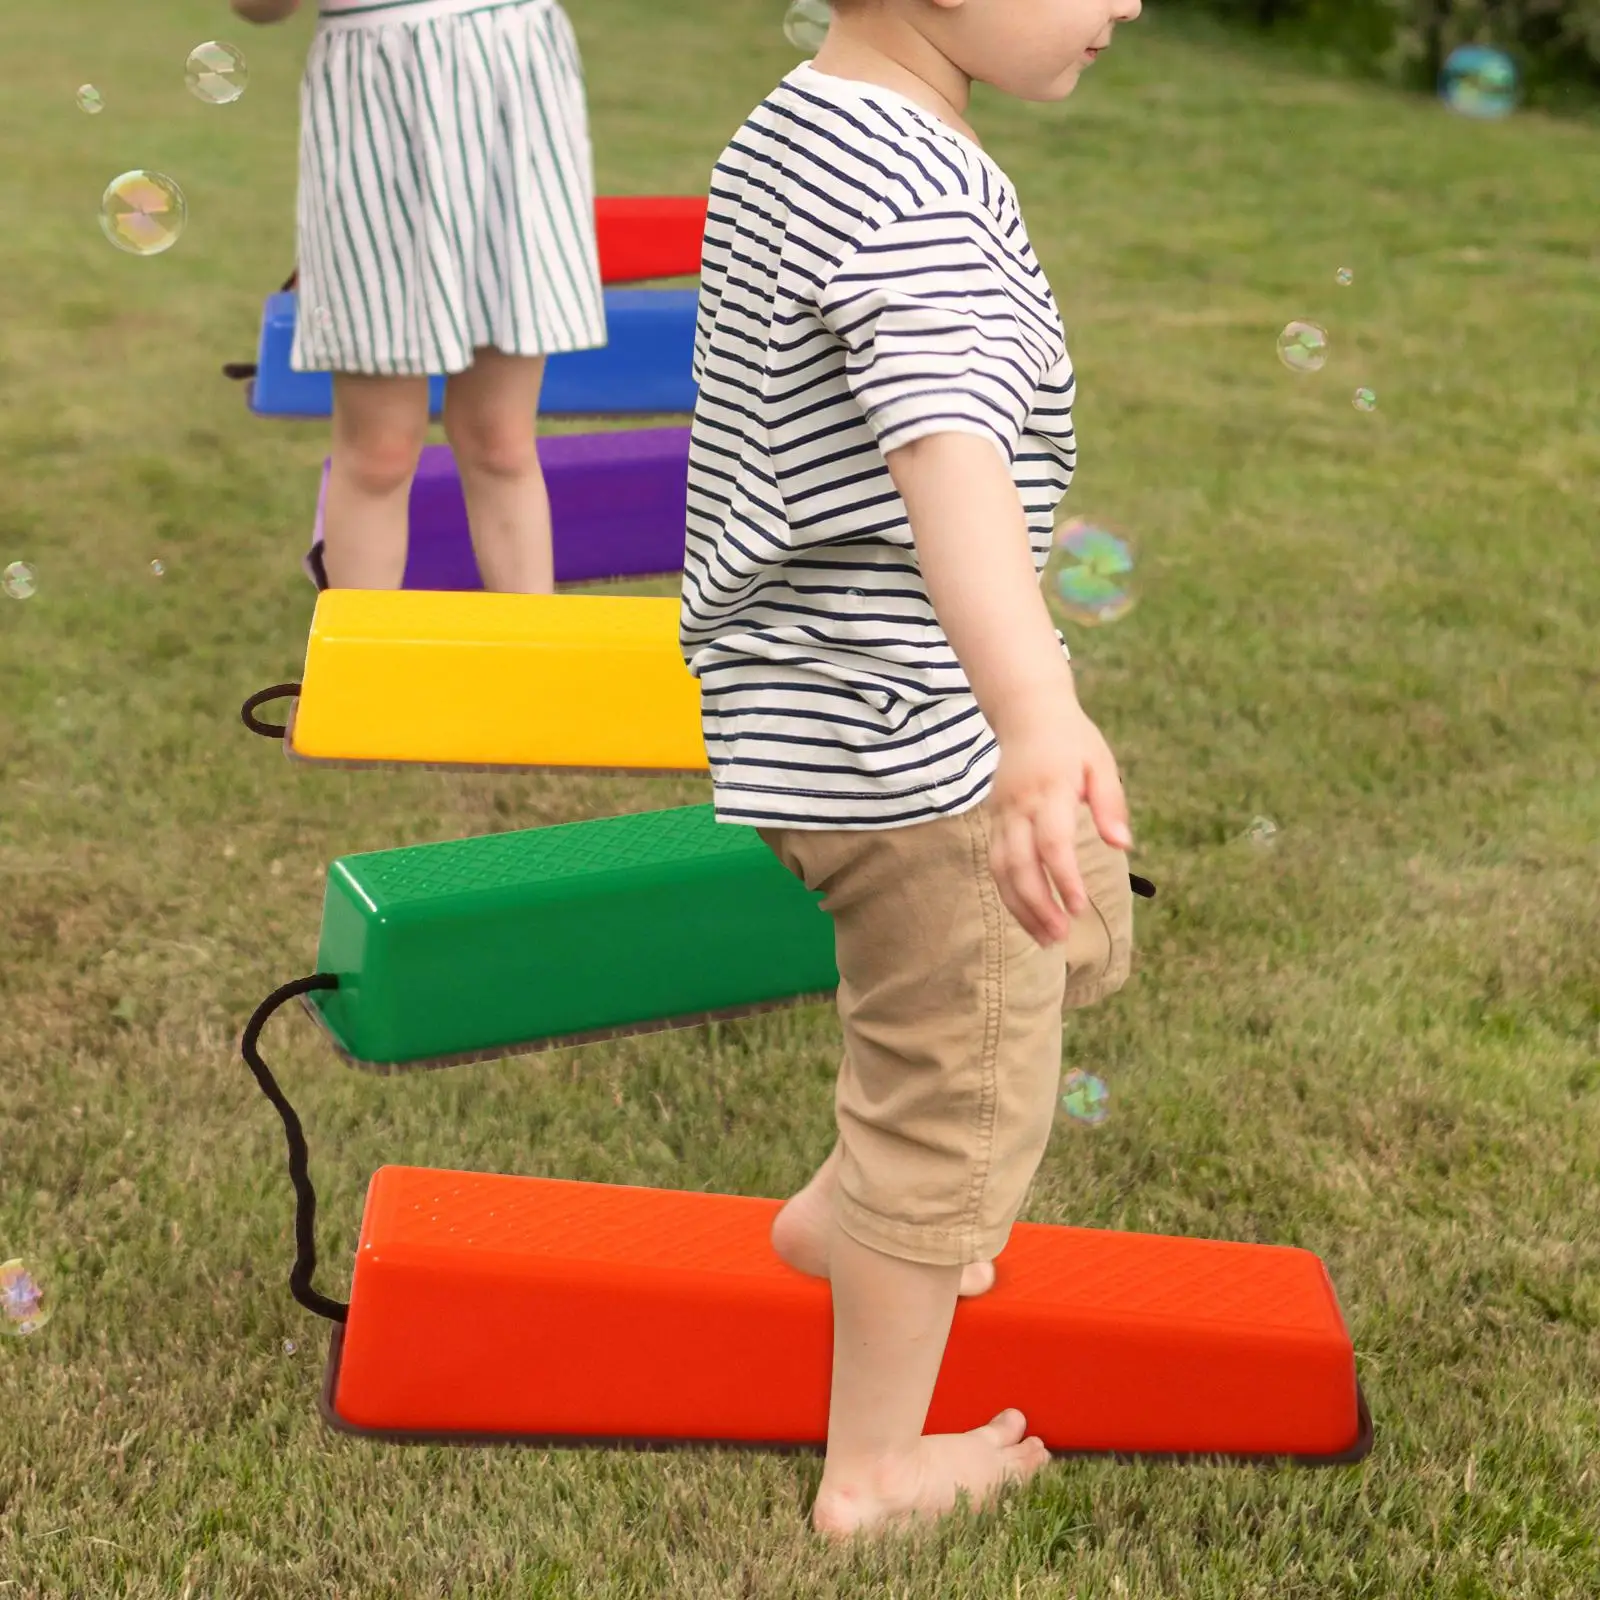 6x Stepping Stones Toys Nonslip Step A Rail Backyard Obstacle Course for Ages 3 Years and up Kids Birthday Gifts